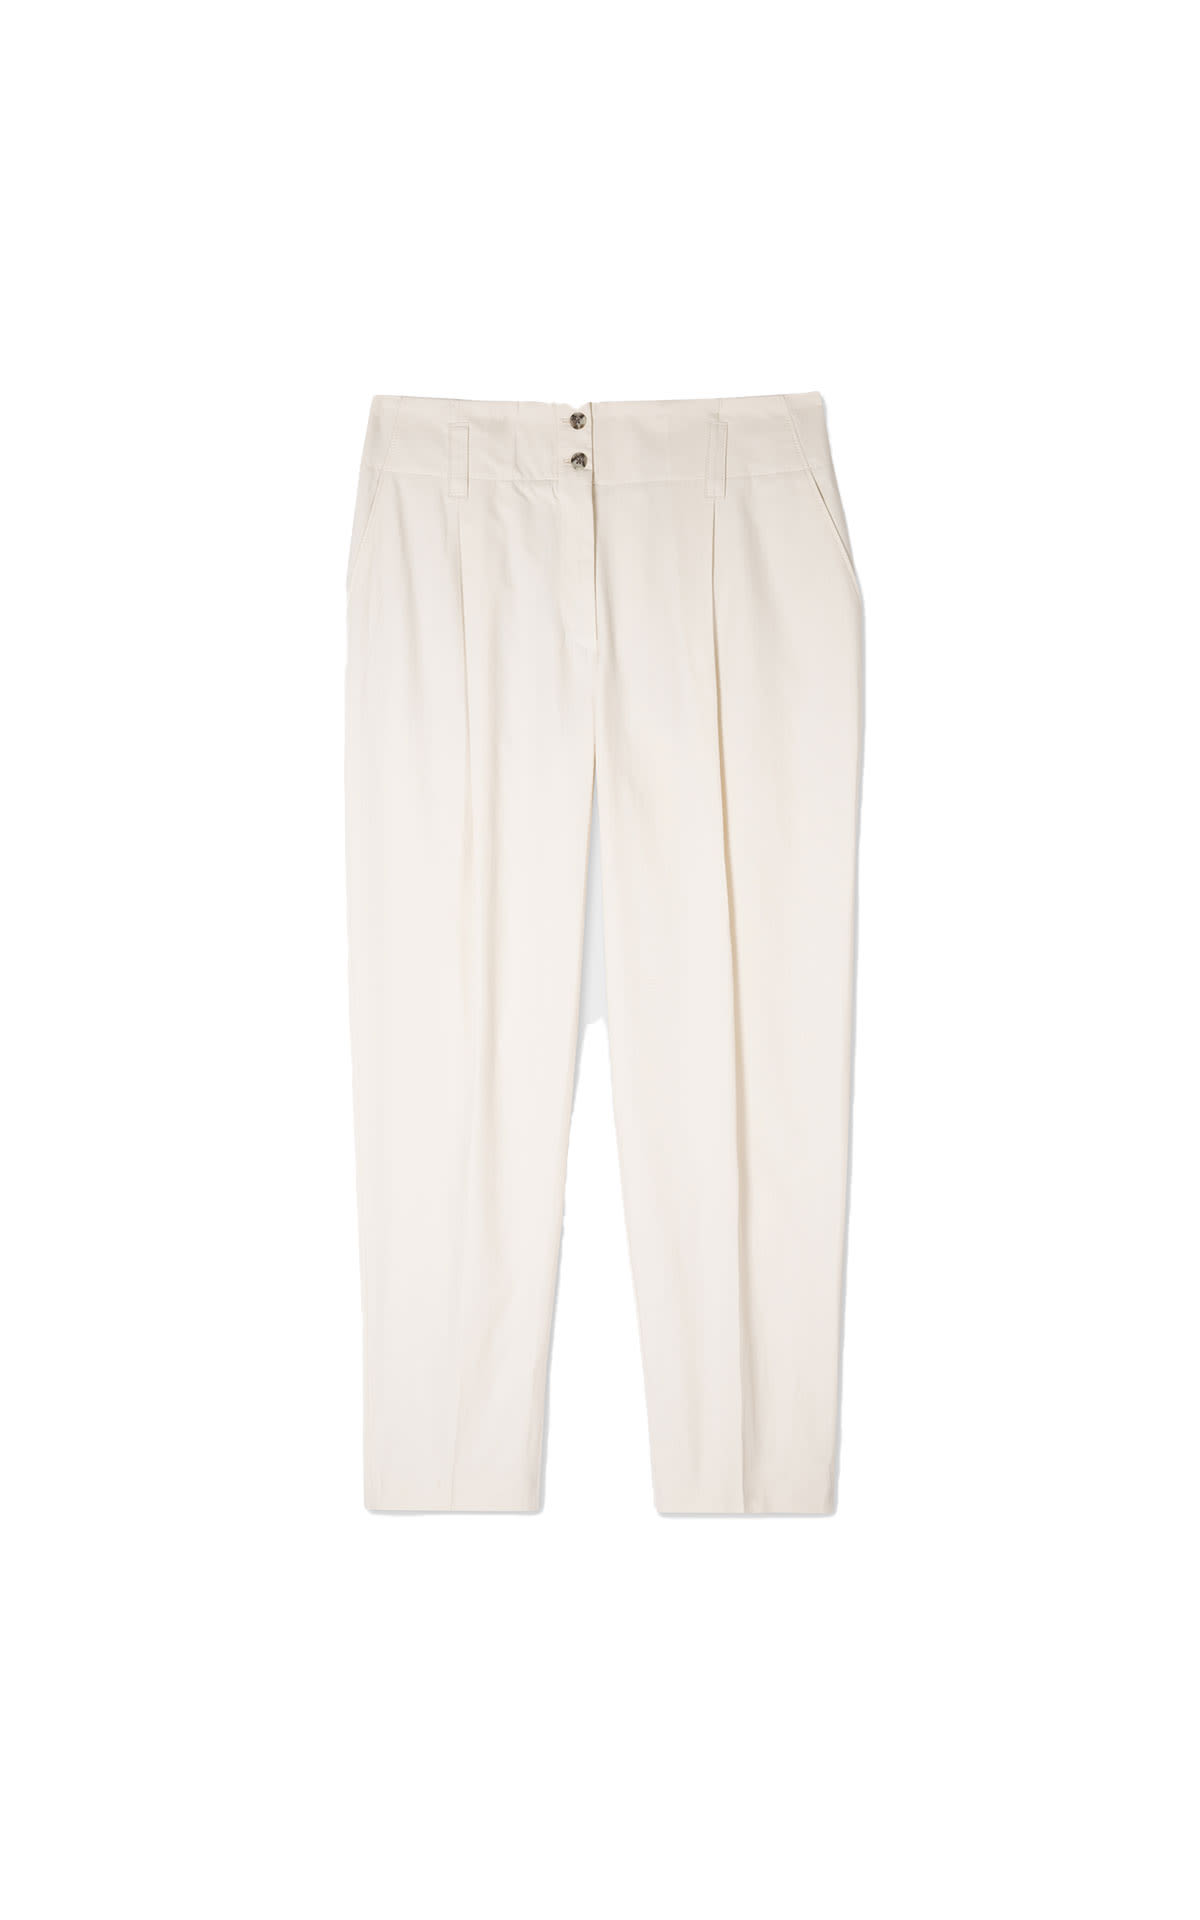 Paul Smith Trouser from Bicester Village